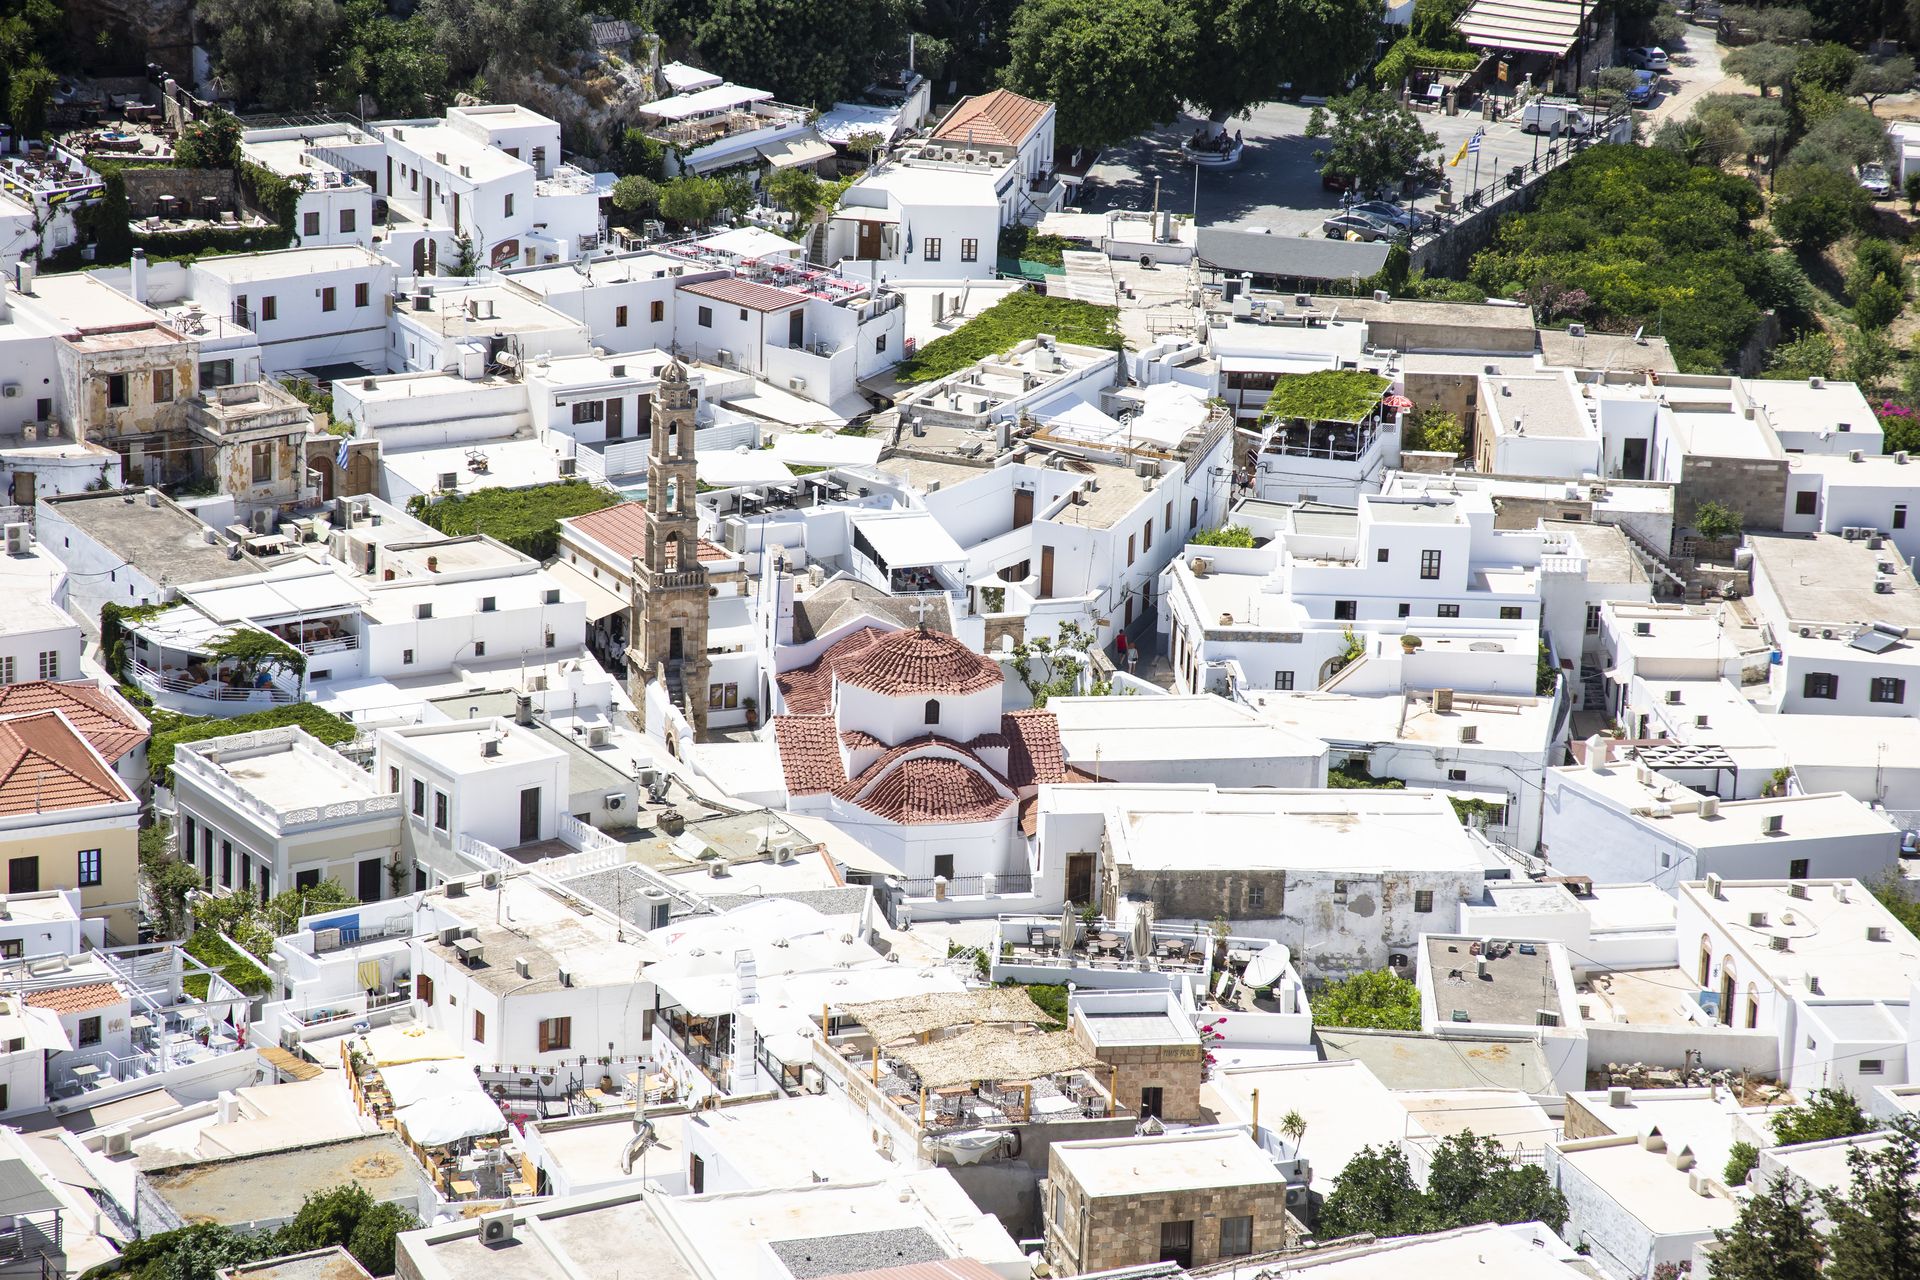 <p>But the Greek islands are not limited to the Cyclades! The Dodecanese islands are full of typical villages and archaeological remains, not to mention superb beaches. The best known is Rhodes, an exceptional place where you can discover the old town, the castle, and the city walls.</p>